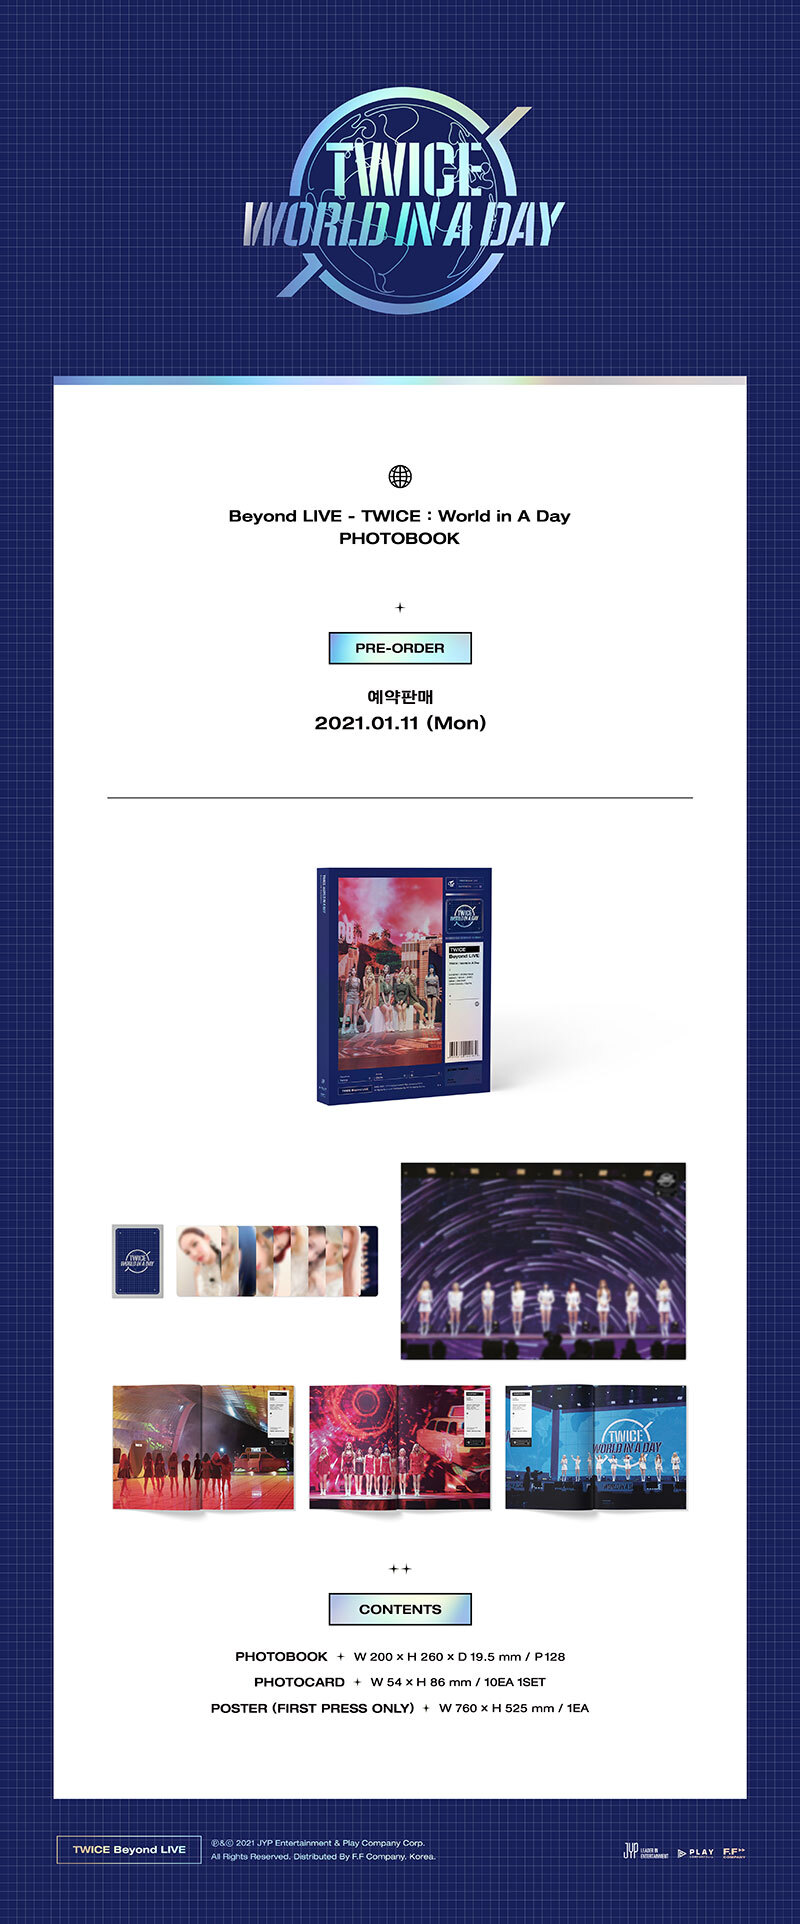 TWICE - Beyond LIVE [TWICE : World in A Day] PHOTO BOOK TWICE TWICEBeyondLIVEphotobook TWICEBeyondLIVE TWICEphotobook TWICEWorldinADay KPOP KPOPGOODS 